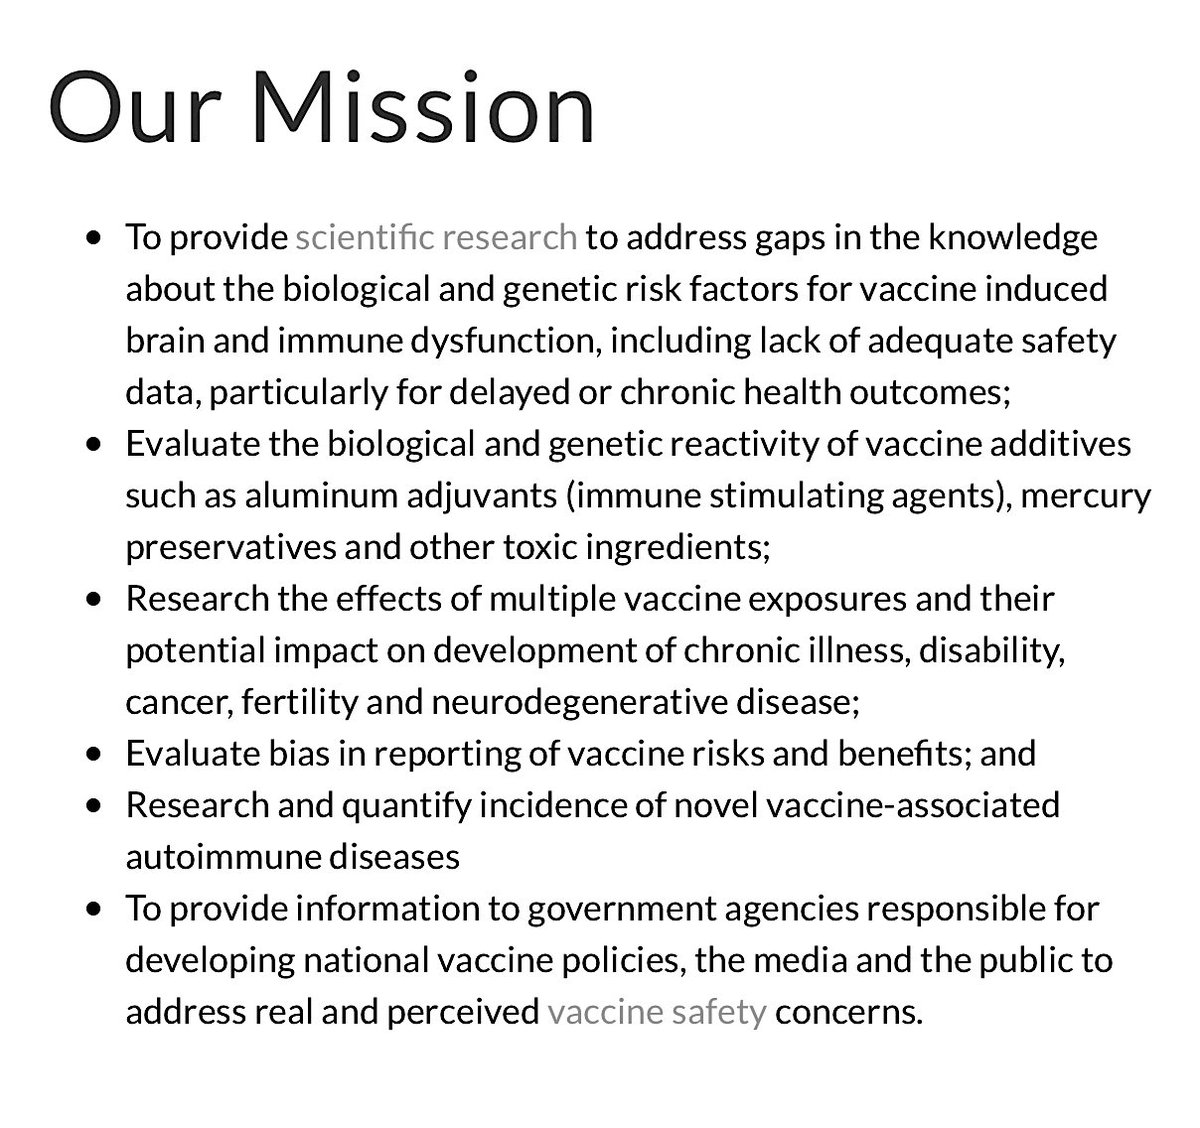 Founded By Claire Dwoskin, CMSRI Is A Comprehensive Website Featuring The Most Important Studies, Dedicated To Funding Independent Research In Hopes Of Providing Answers To Our Growing, Worldwide Epidemic Of Chronic Disease And Disability. https://www.cmsri.org  #QAnon  @potus